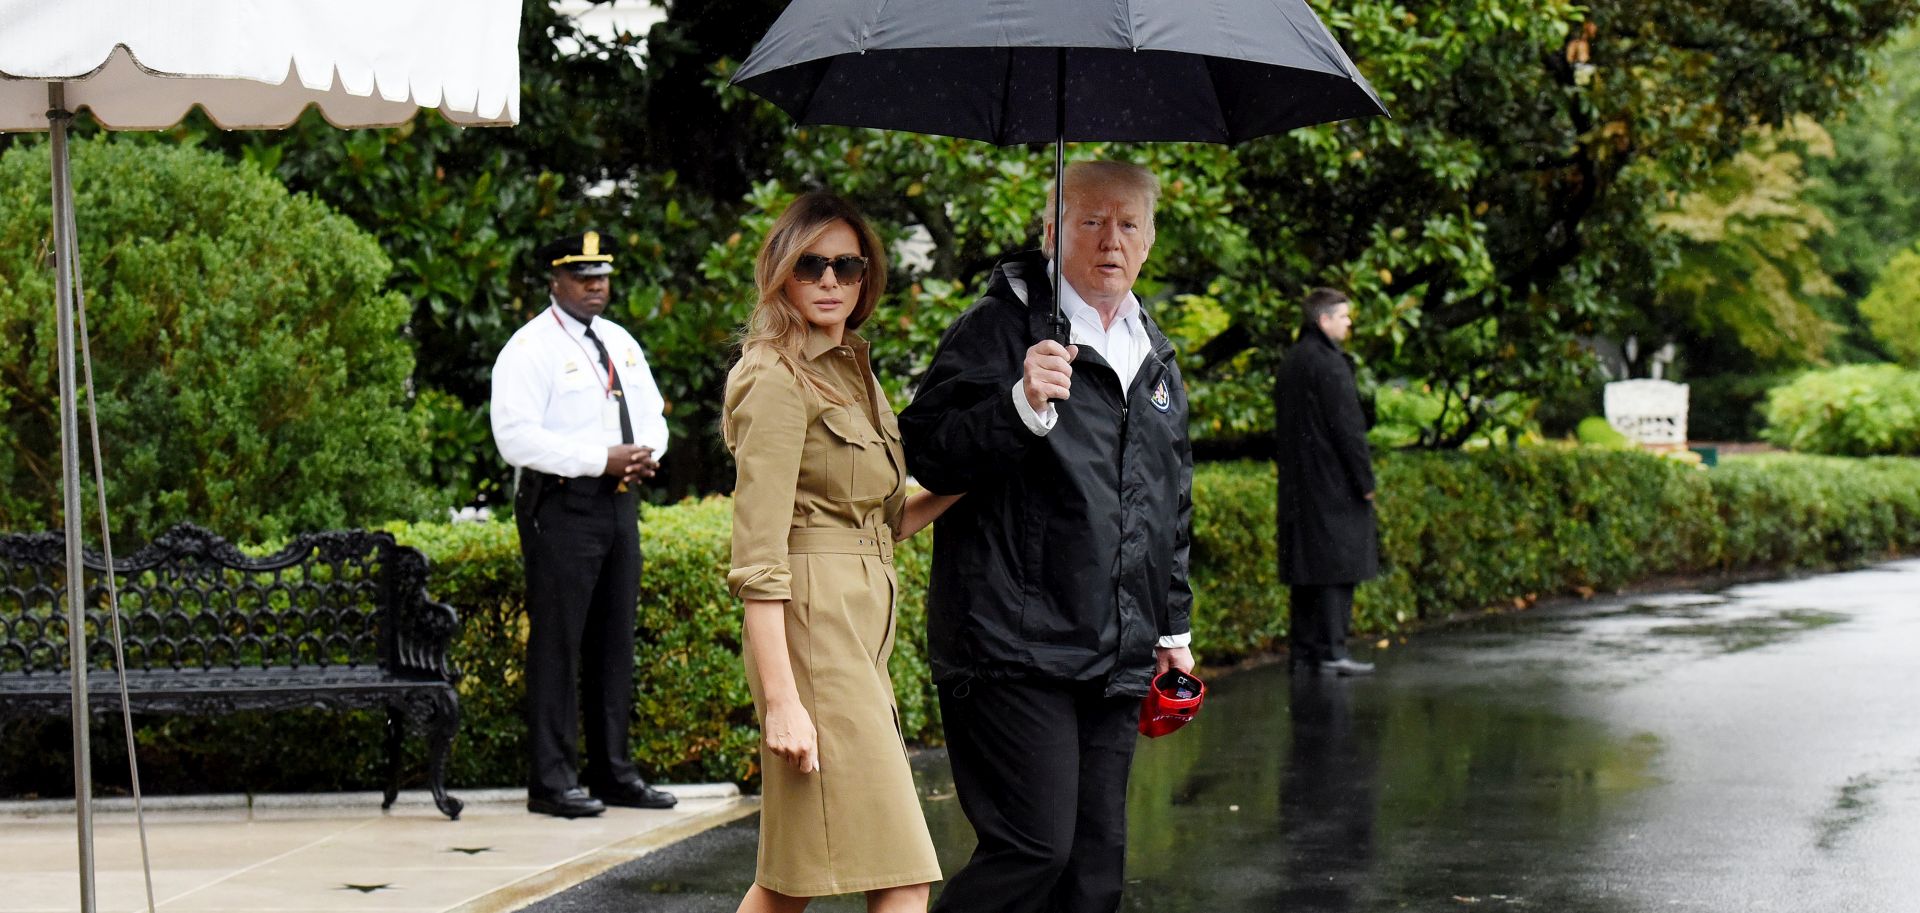 epa06179011 US President Donald J. Trump (C-R) walks with First Lady Melania Trump (C-L) prior to their departure by the 'Marine One' helicopter from the White House in Washington, DC, USA, 02 September 2017. The US President and First Lady are reported to travel again to Texas to visit individuals impacted by Hurricane Harvey.  EPA/Olivier Douliery / POOL